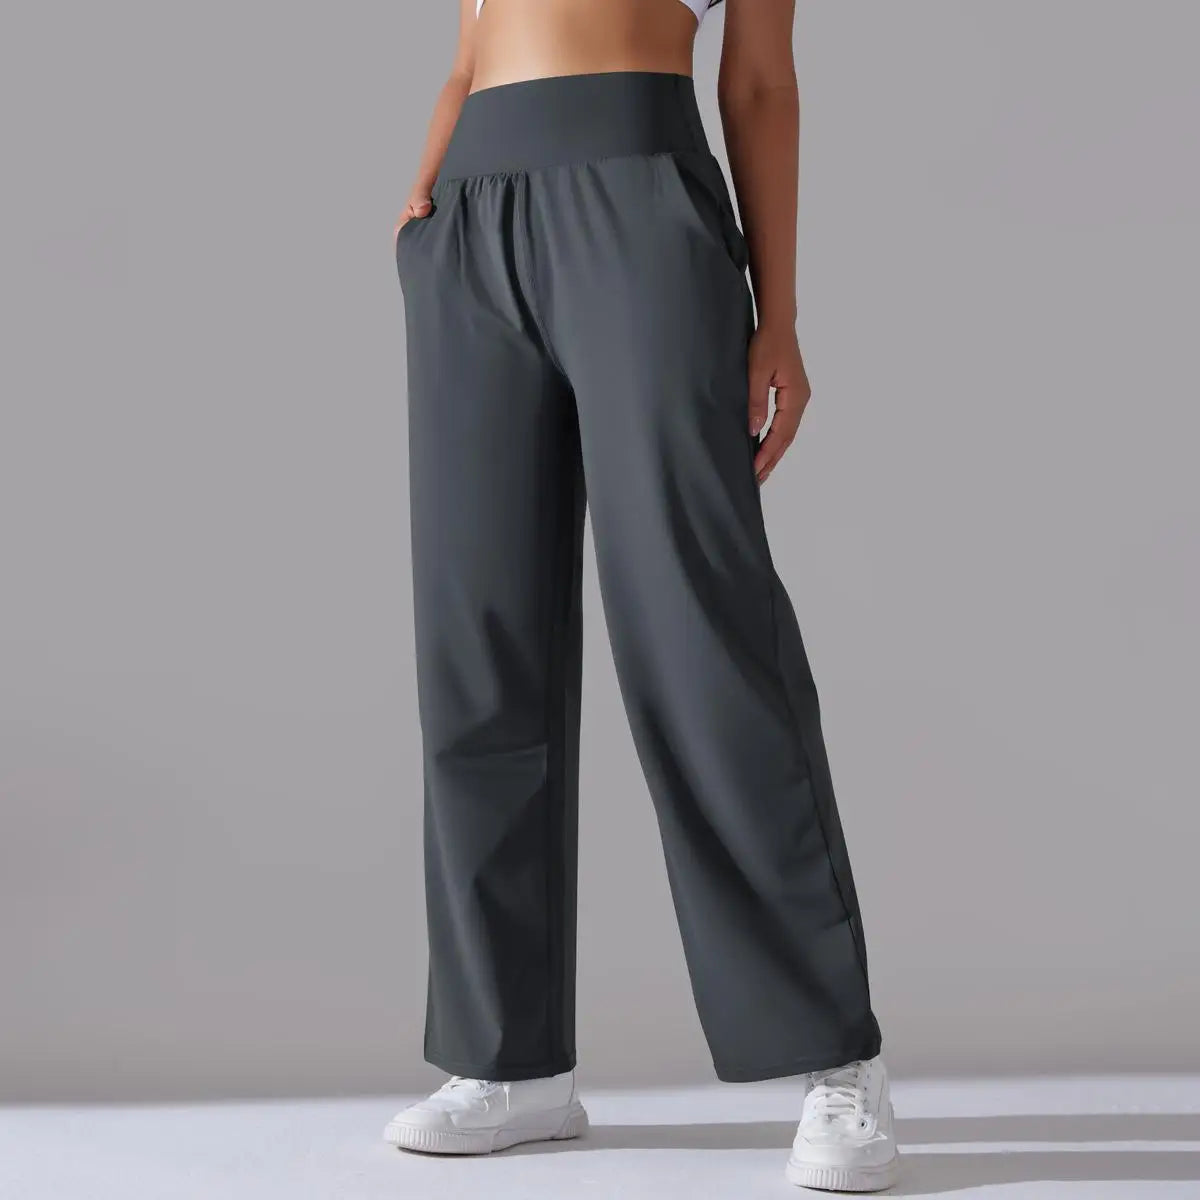 
                  
                    Sean Tsing® Women Sporty Pants Elastic Waist Solid Color Wide Leg Cropped Trousers for Running Yoga Pilates Athletic Bottoms
                  
                